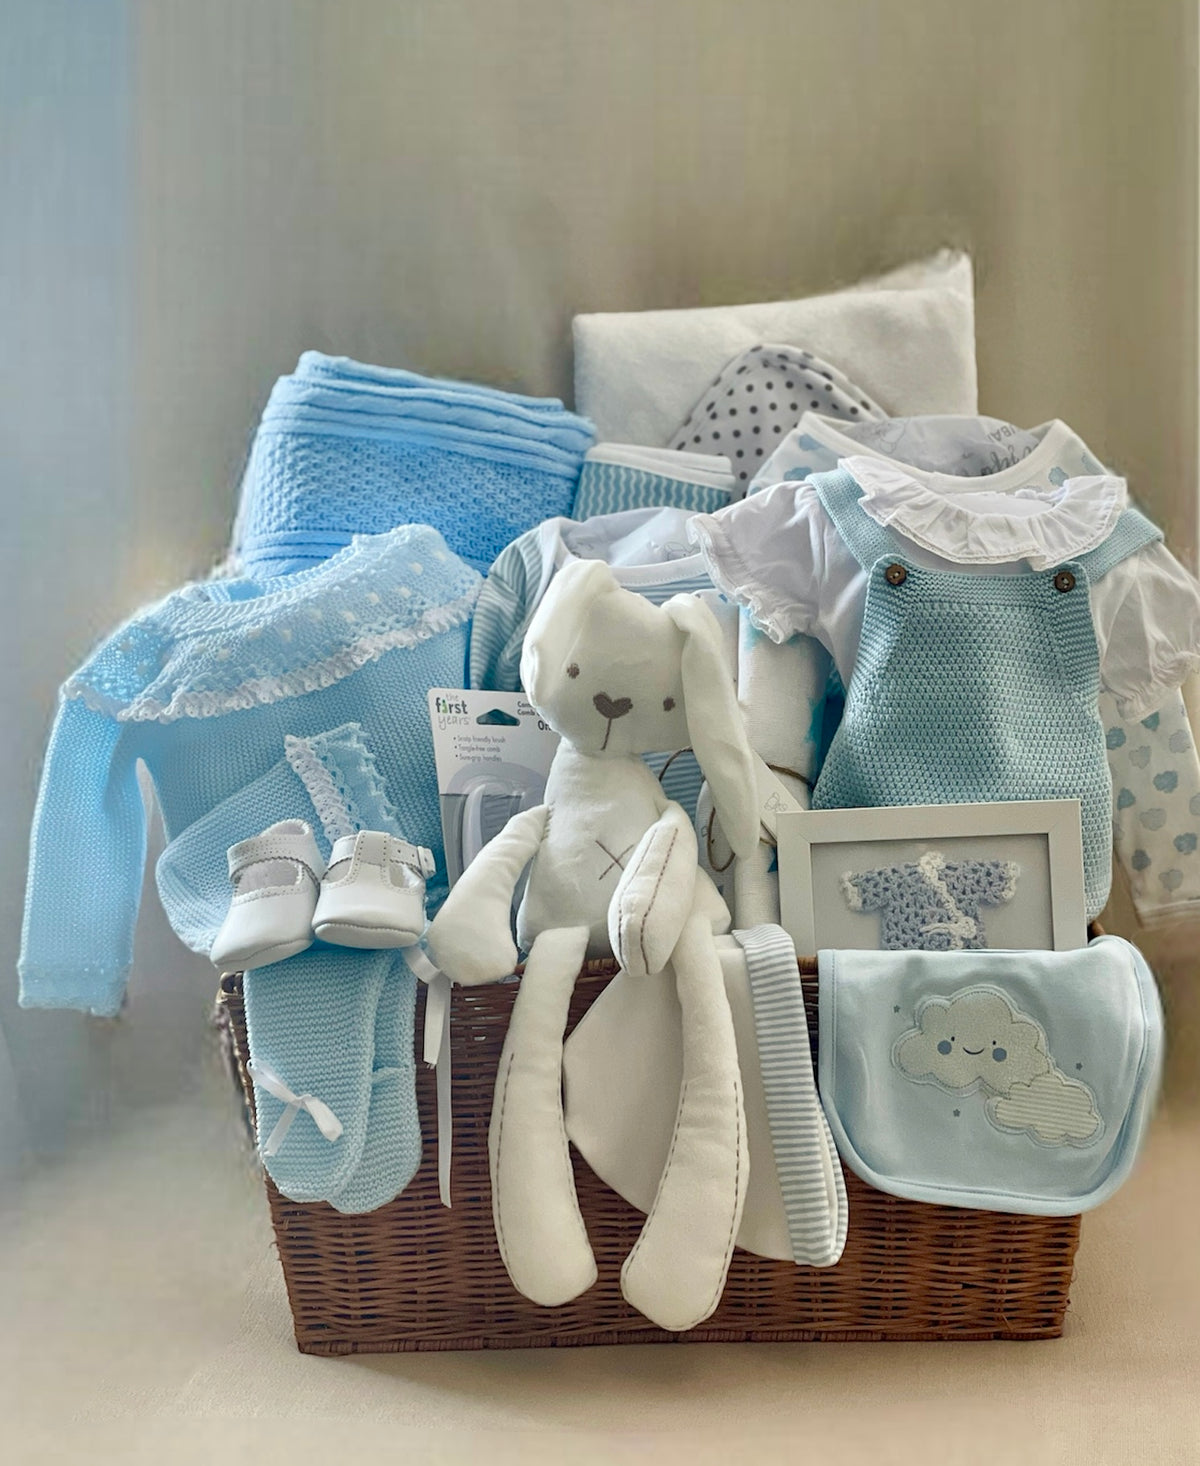 Amazon.com : Baby Shower Gifts Basket for Boy - 18 Baby Boy Essentials,  Blue Baby Gift Sets for Newborn, New Baby Boy Gift Basket, Maternity  Welcome Baby Boy Gift : Baby